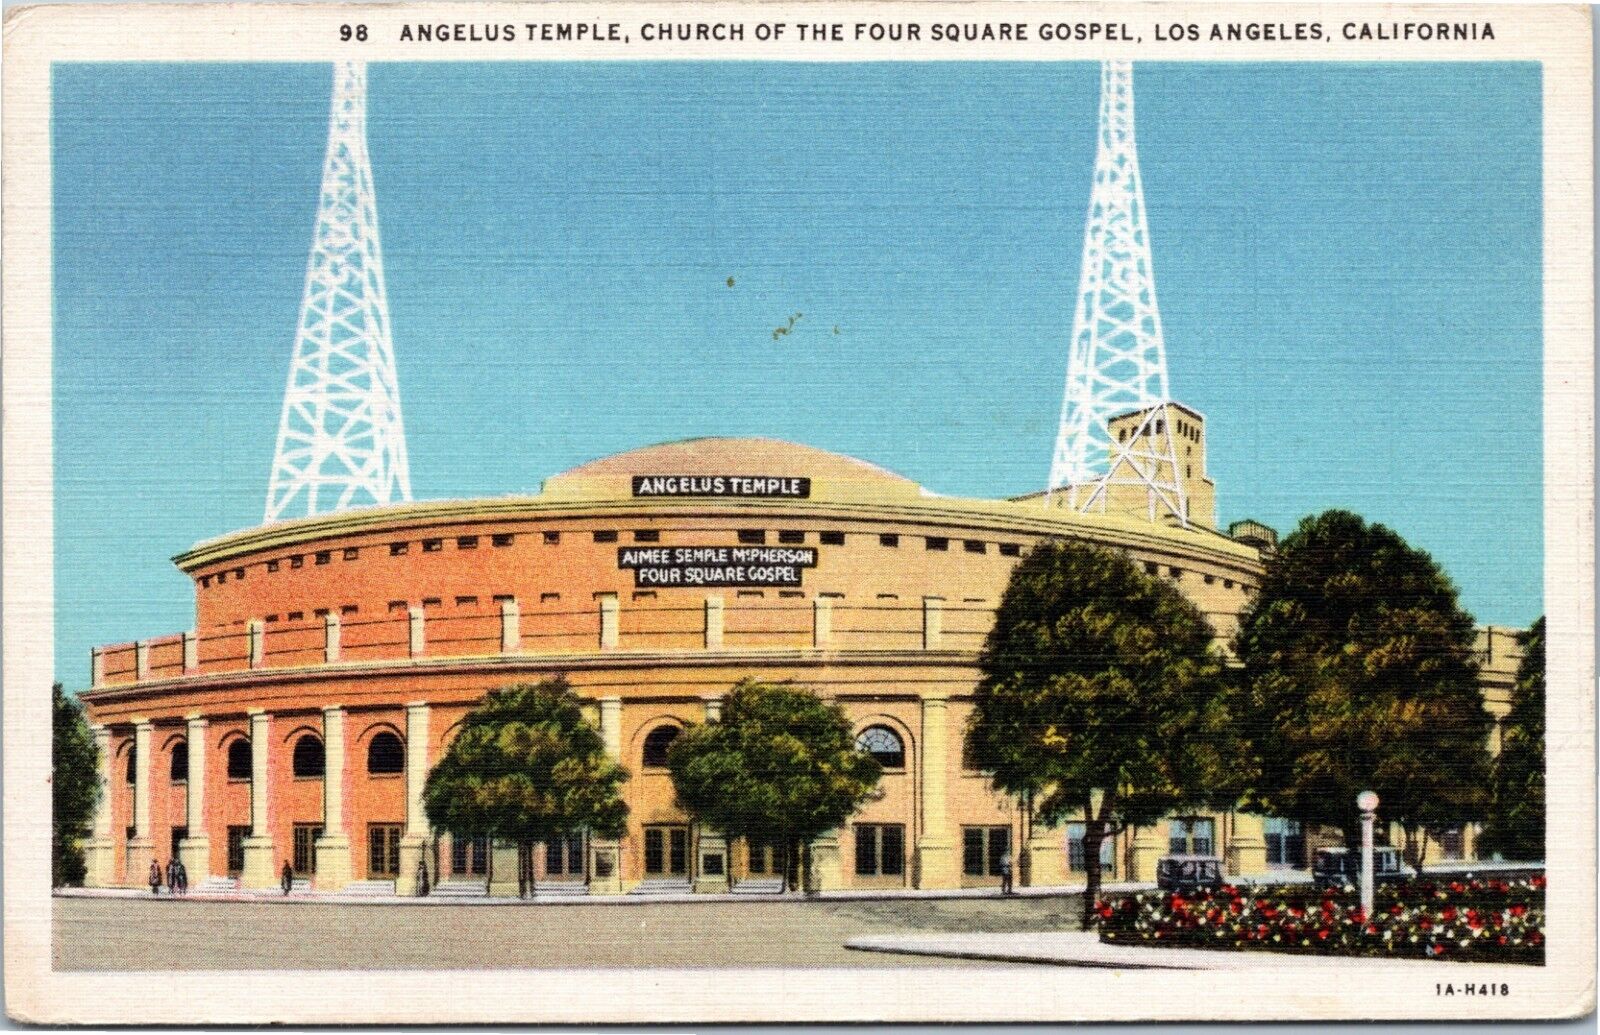 Los Angeles -Angelus Temple, Church of the Four Square Gospel